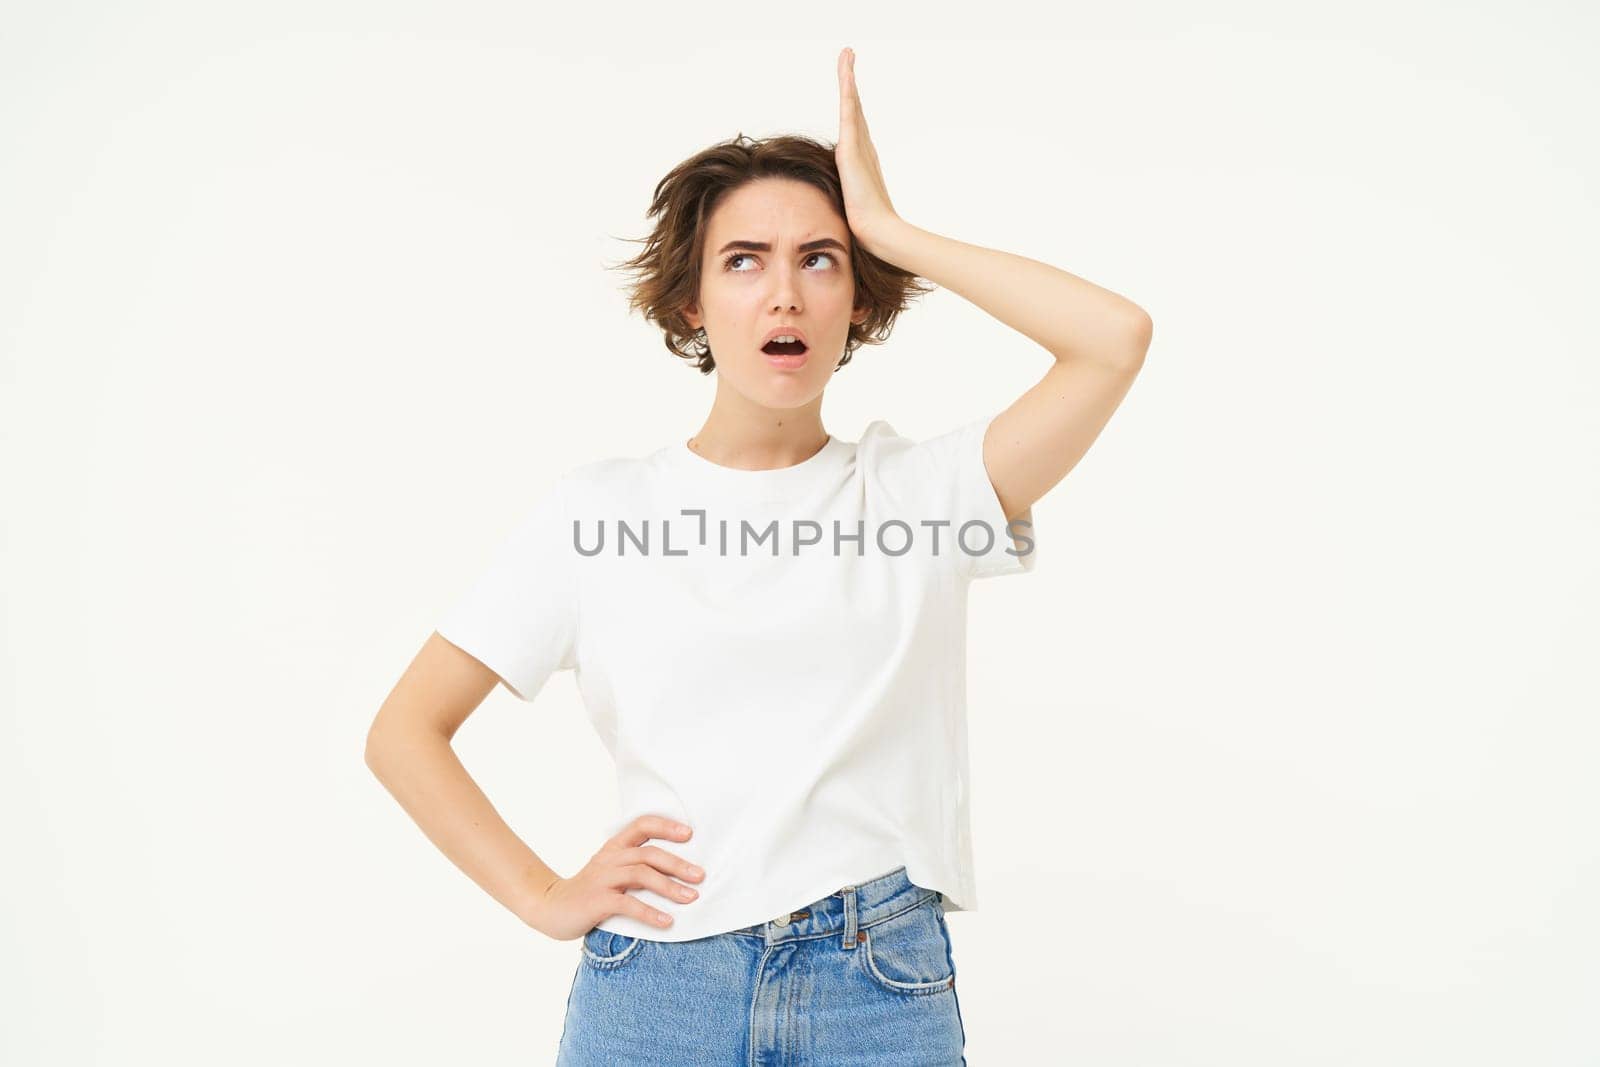 Portrait of forgetful woman, touches her head, remember something important, looks upset or shocked, stands over white background.